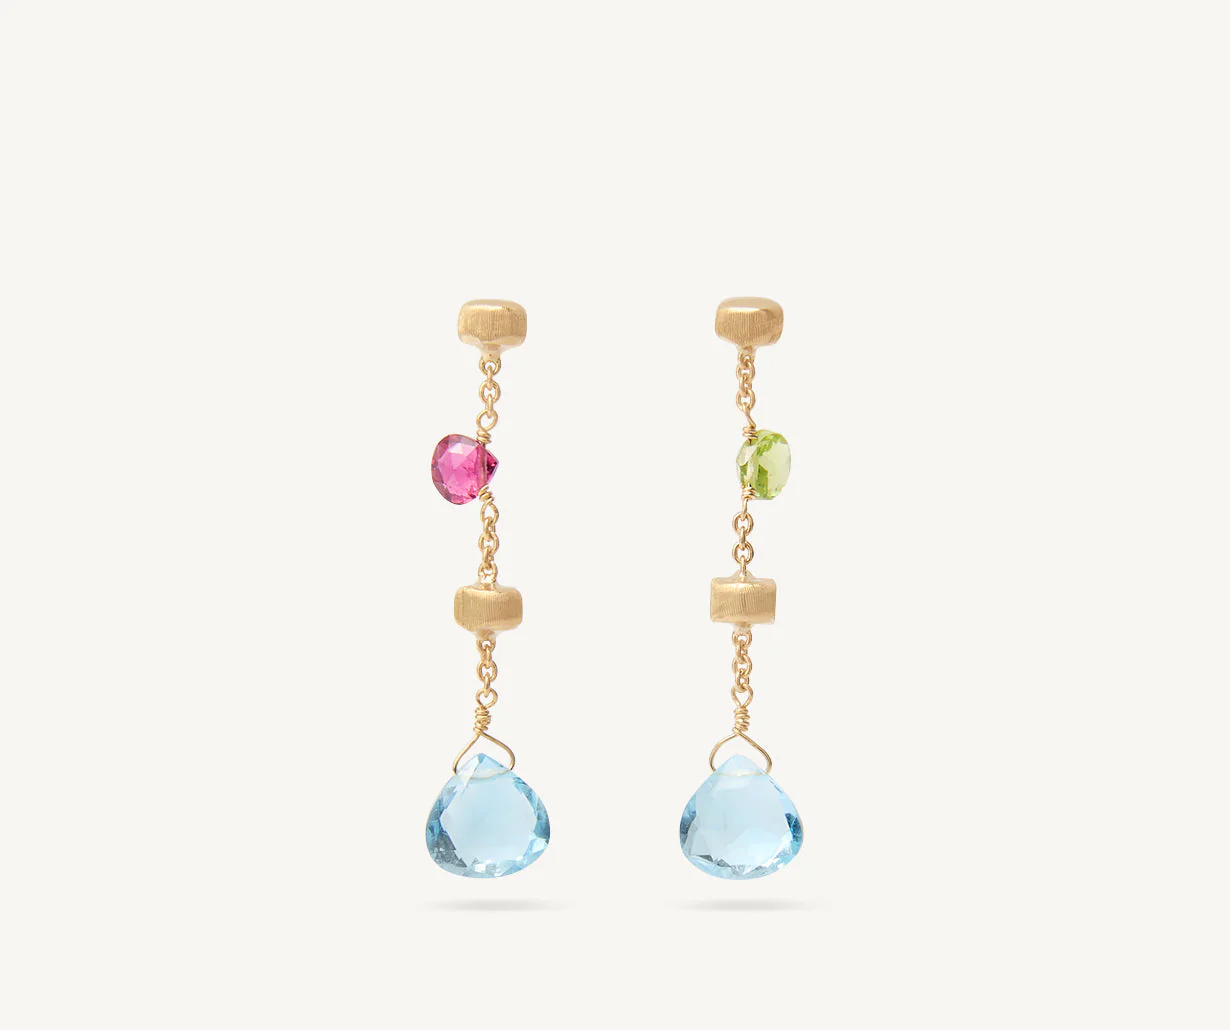 Blue topaz and yellow gold drop earrings by Marco Bicego Paradise collection 